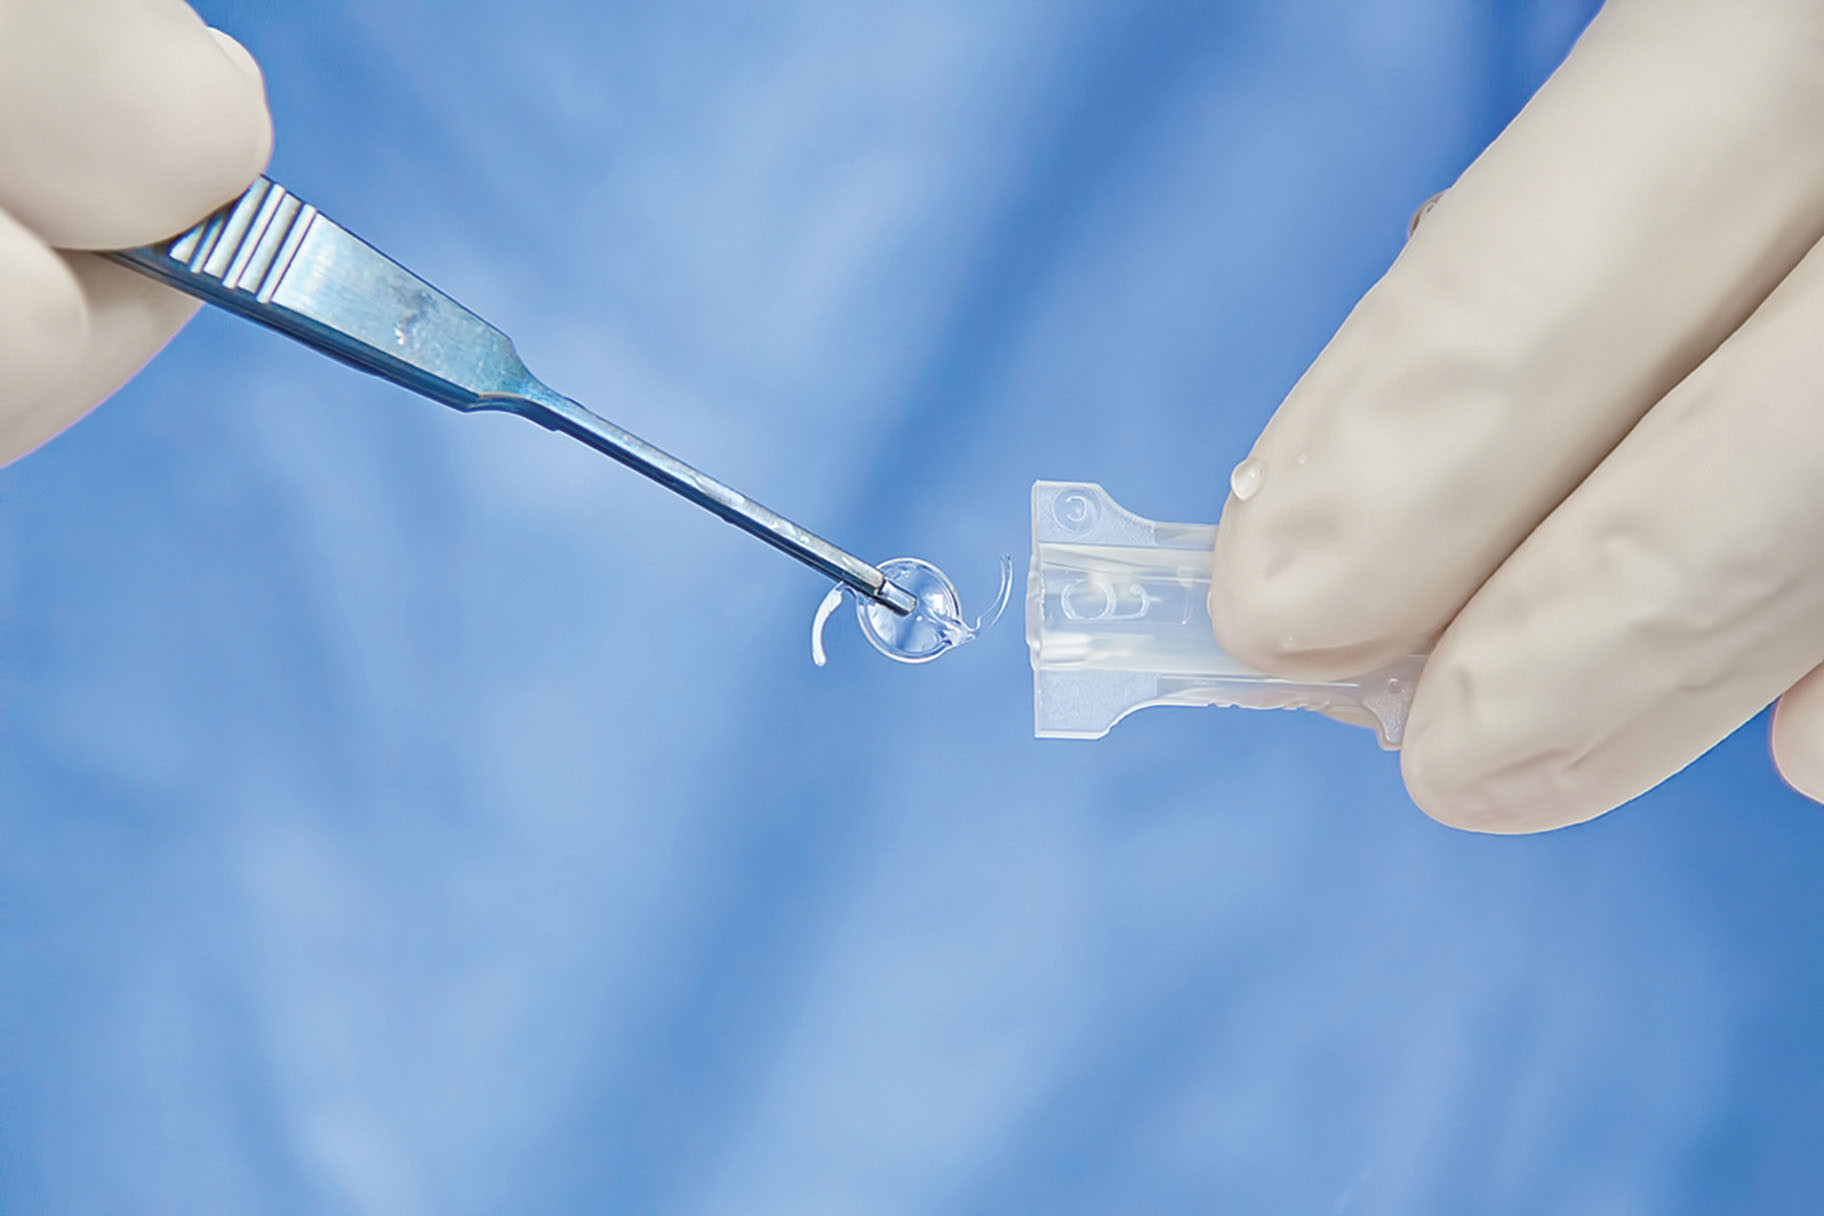 close-up photo of hands holding a vial and using a small tool to remove an artificial lens from it